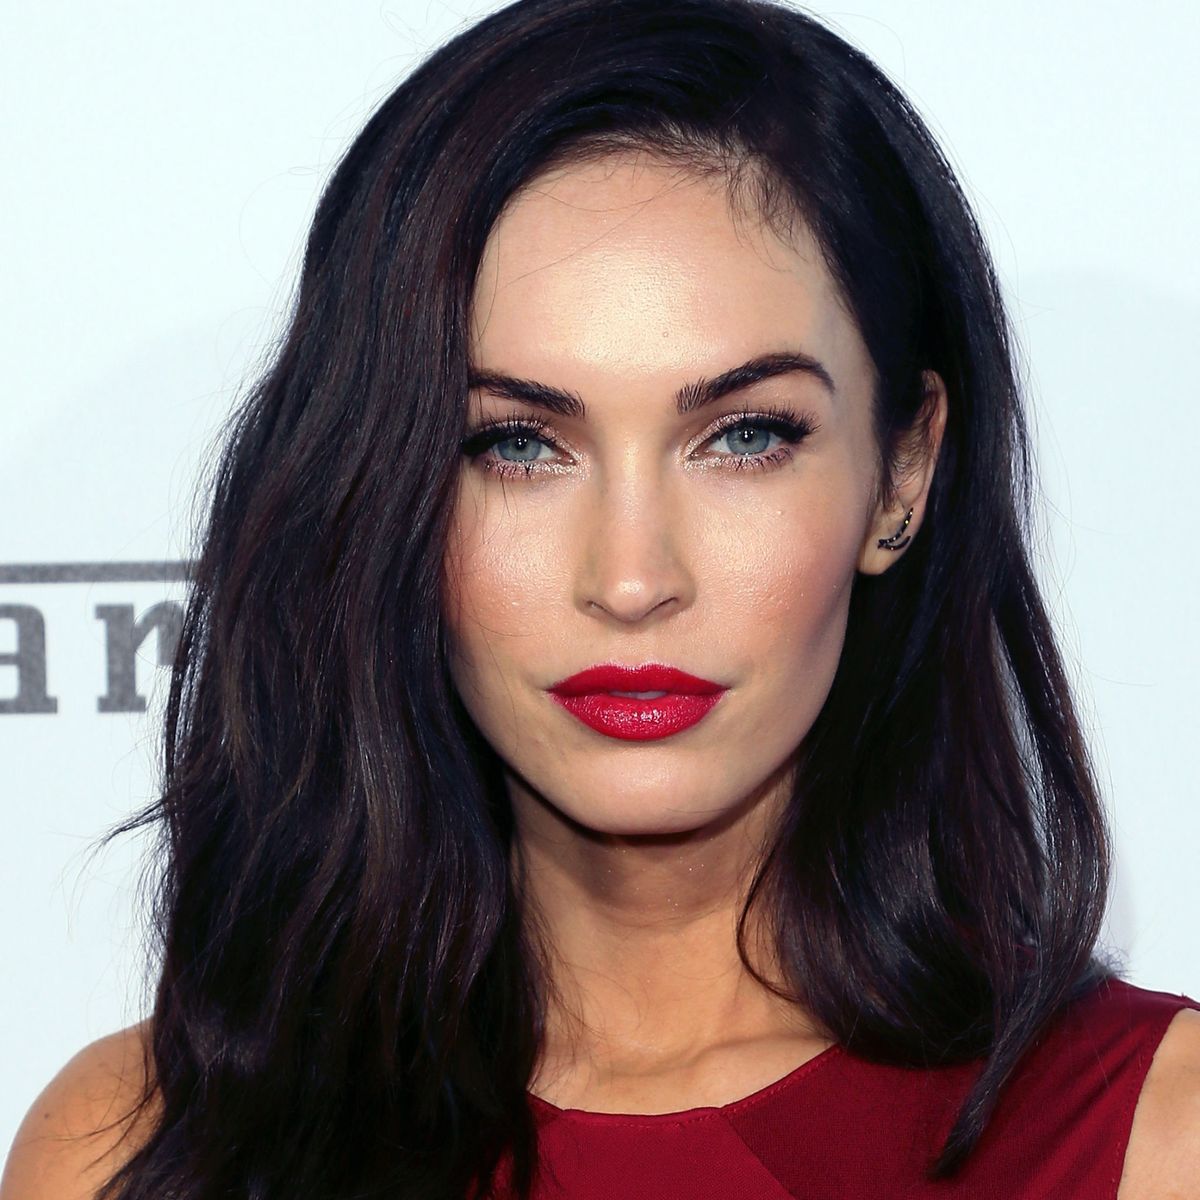 Adult Porno Megan Fox - Megan Fox Is an Original DGAF Celebrity and It's Time She Gets Your Respect